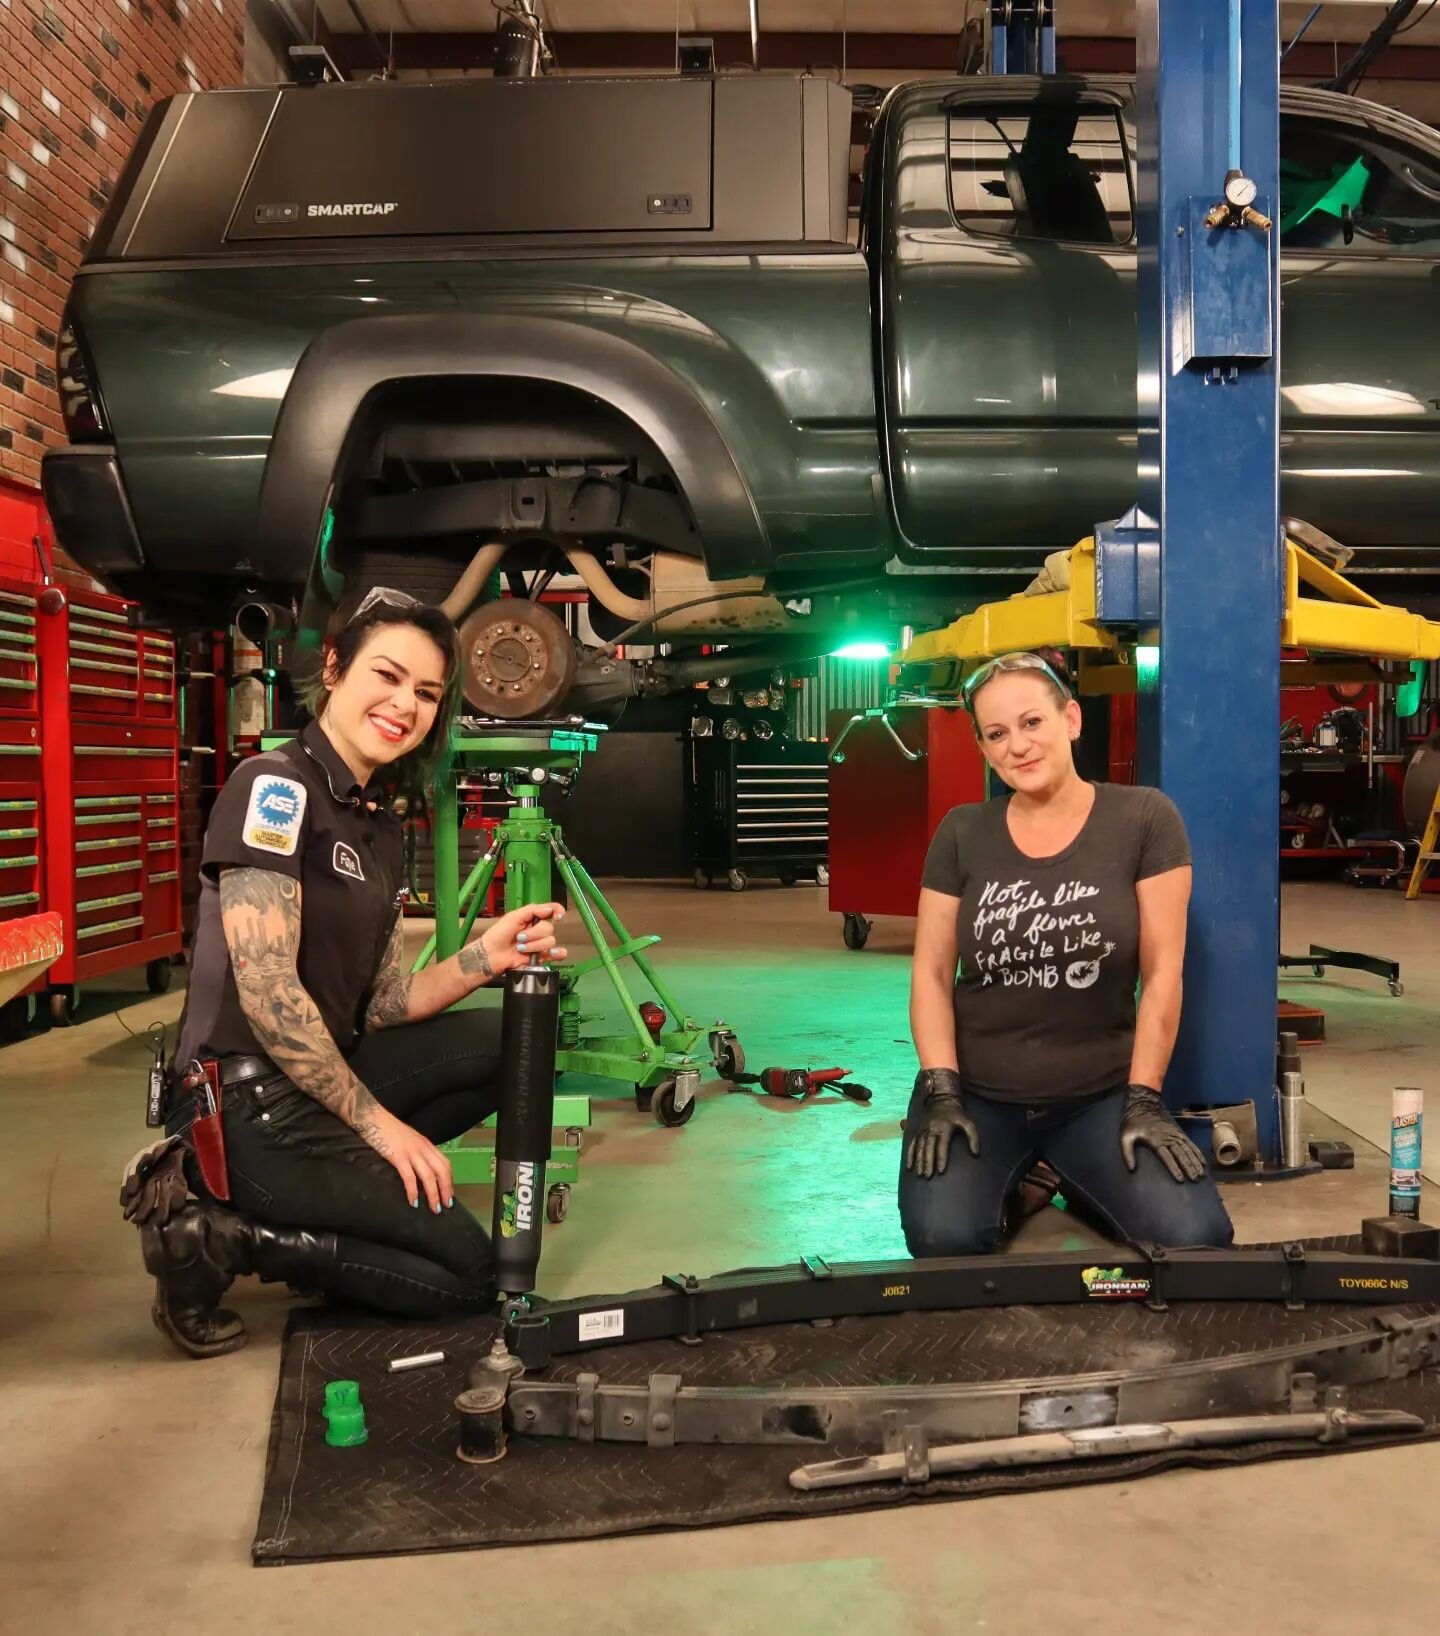 TODAY IS THE DAY!!!! Check out @street675r's Tacoma on @allgirlsgarage!! Bogi and I tackle a suspension upgrade, install new wheels and tires, rooftop tent, and an awning to complete phase 1 of our overlanding build!!! There is still so much more to 